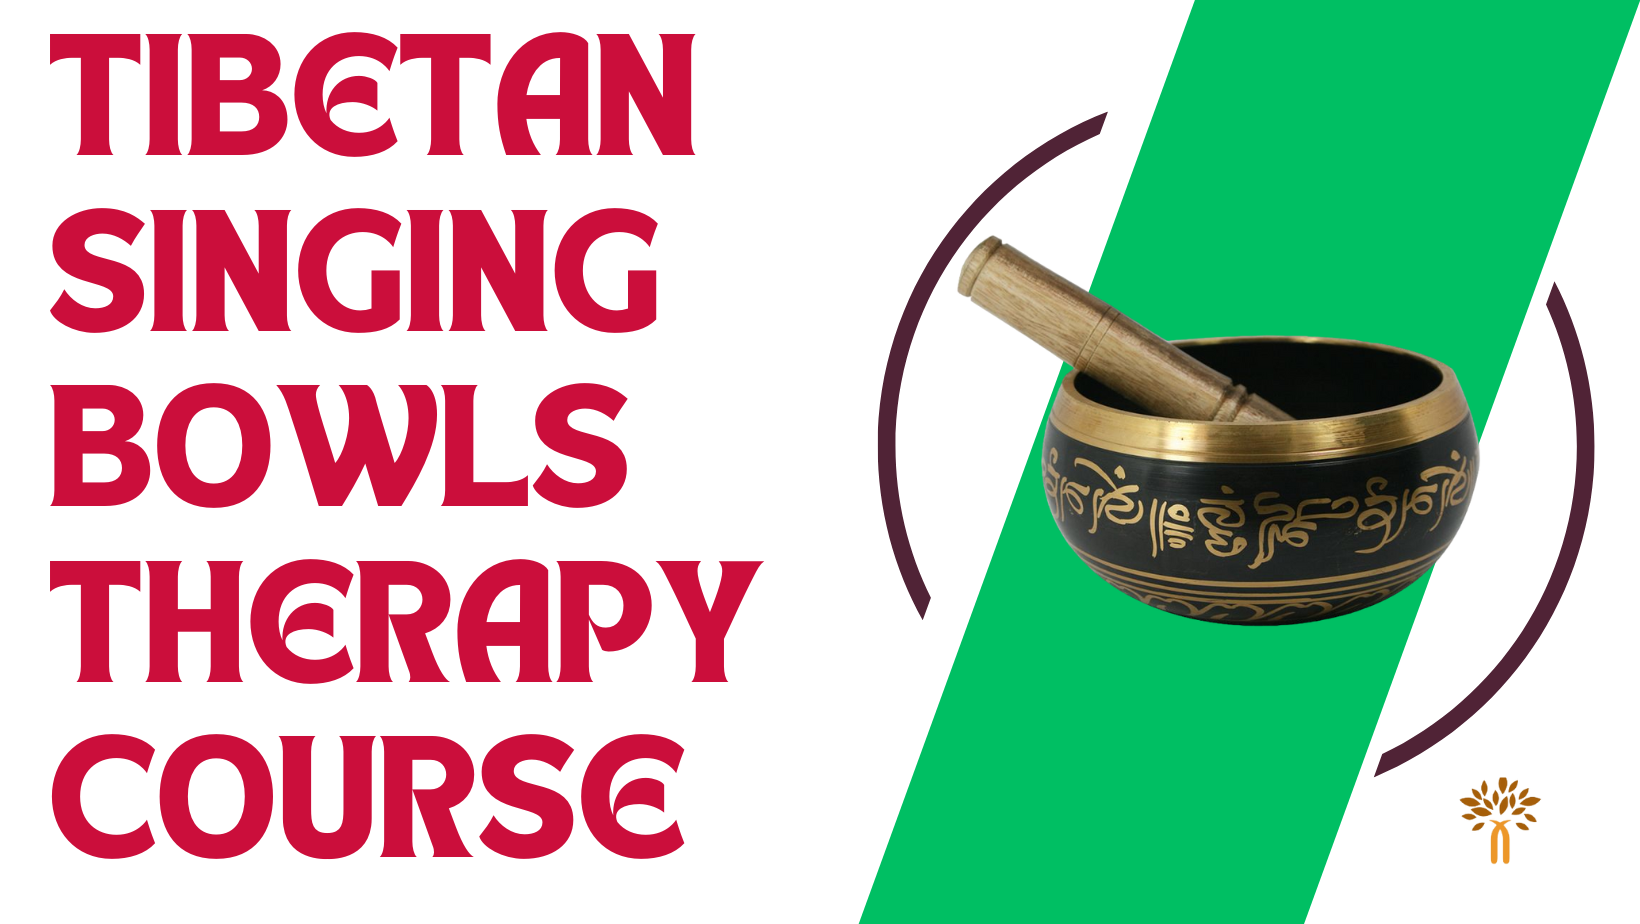 Tibetan Singing Bowls Therapy Courses in Pune